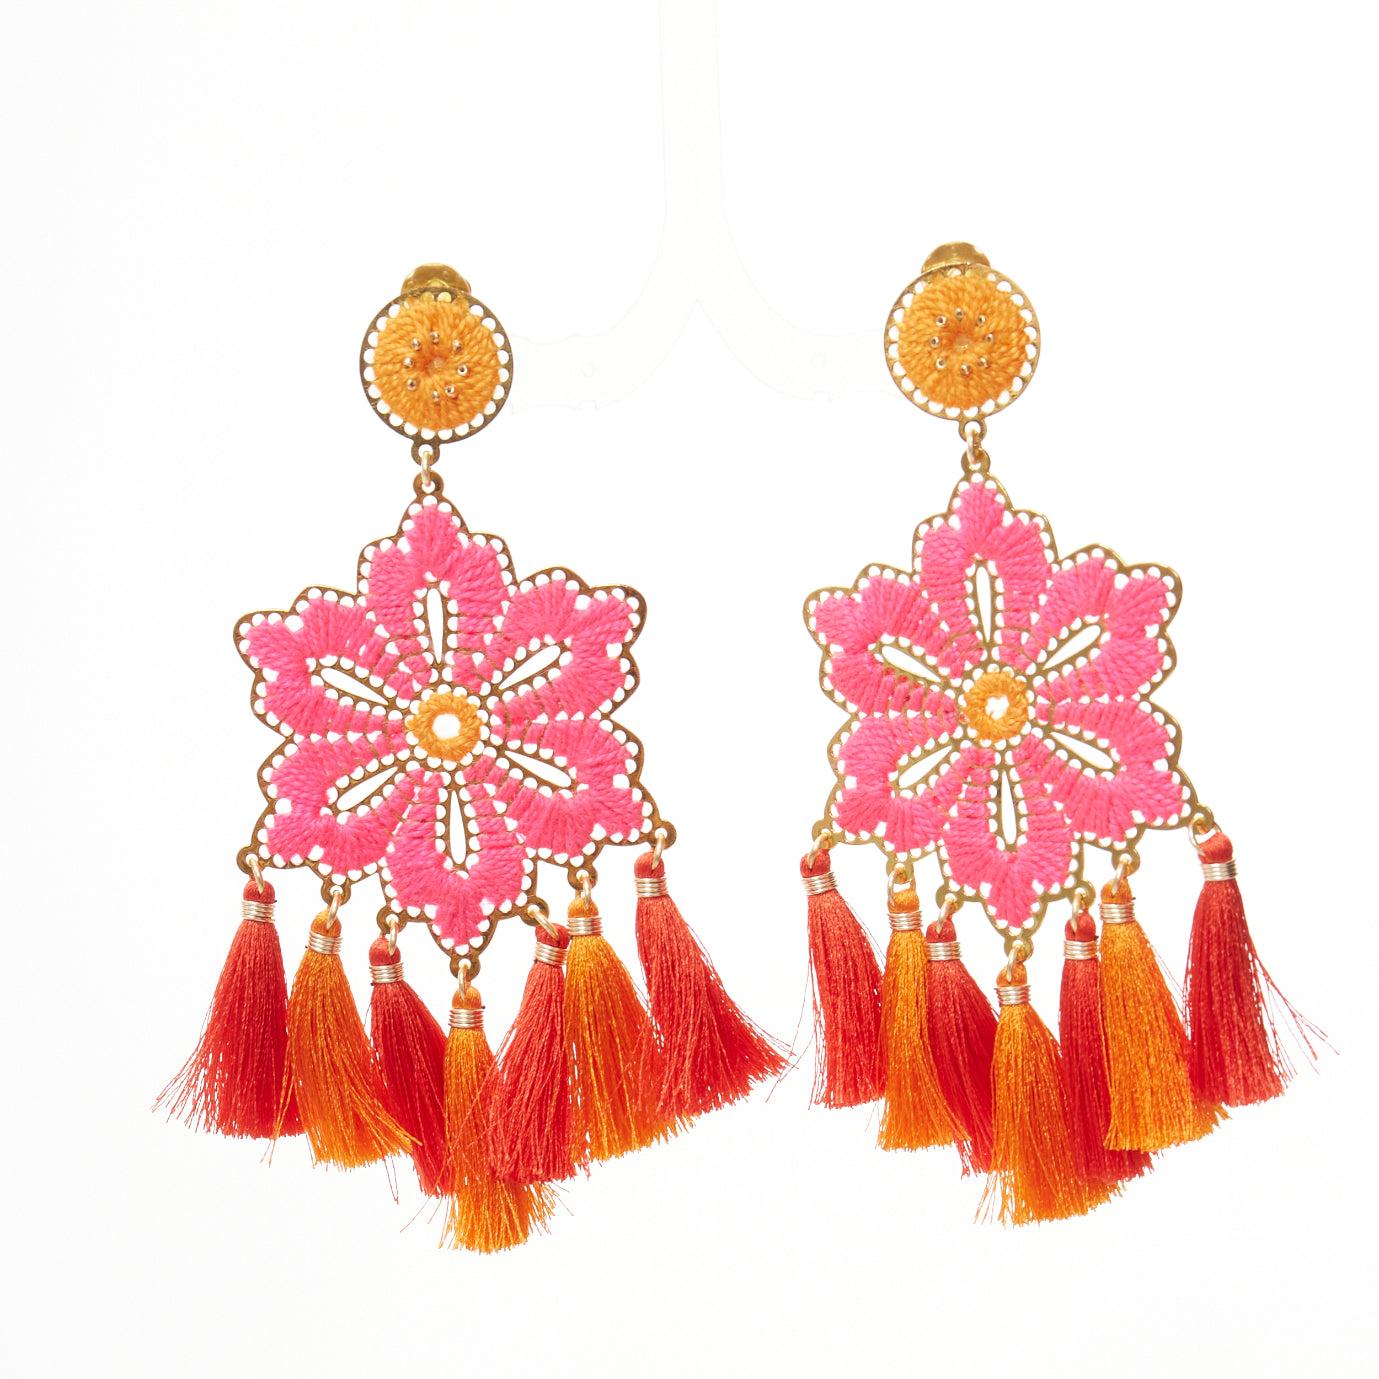 MERCEDES SALAZAR neon pink orange floral tassel gold clip on earrings
Reference: AAWC/A01247
Brand: Mercedes Salazar
Material: Metal, Fabric
Color: Neon Pink, Gold
Pattern: Solid
Closure: Clip On
Lining: Gold Metal
Extra Details: Logo at one of the